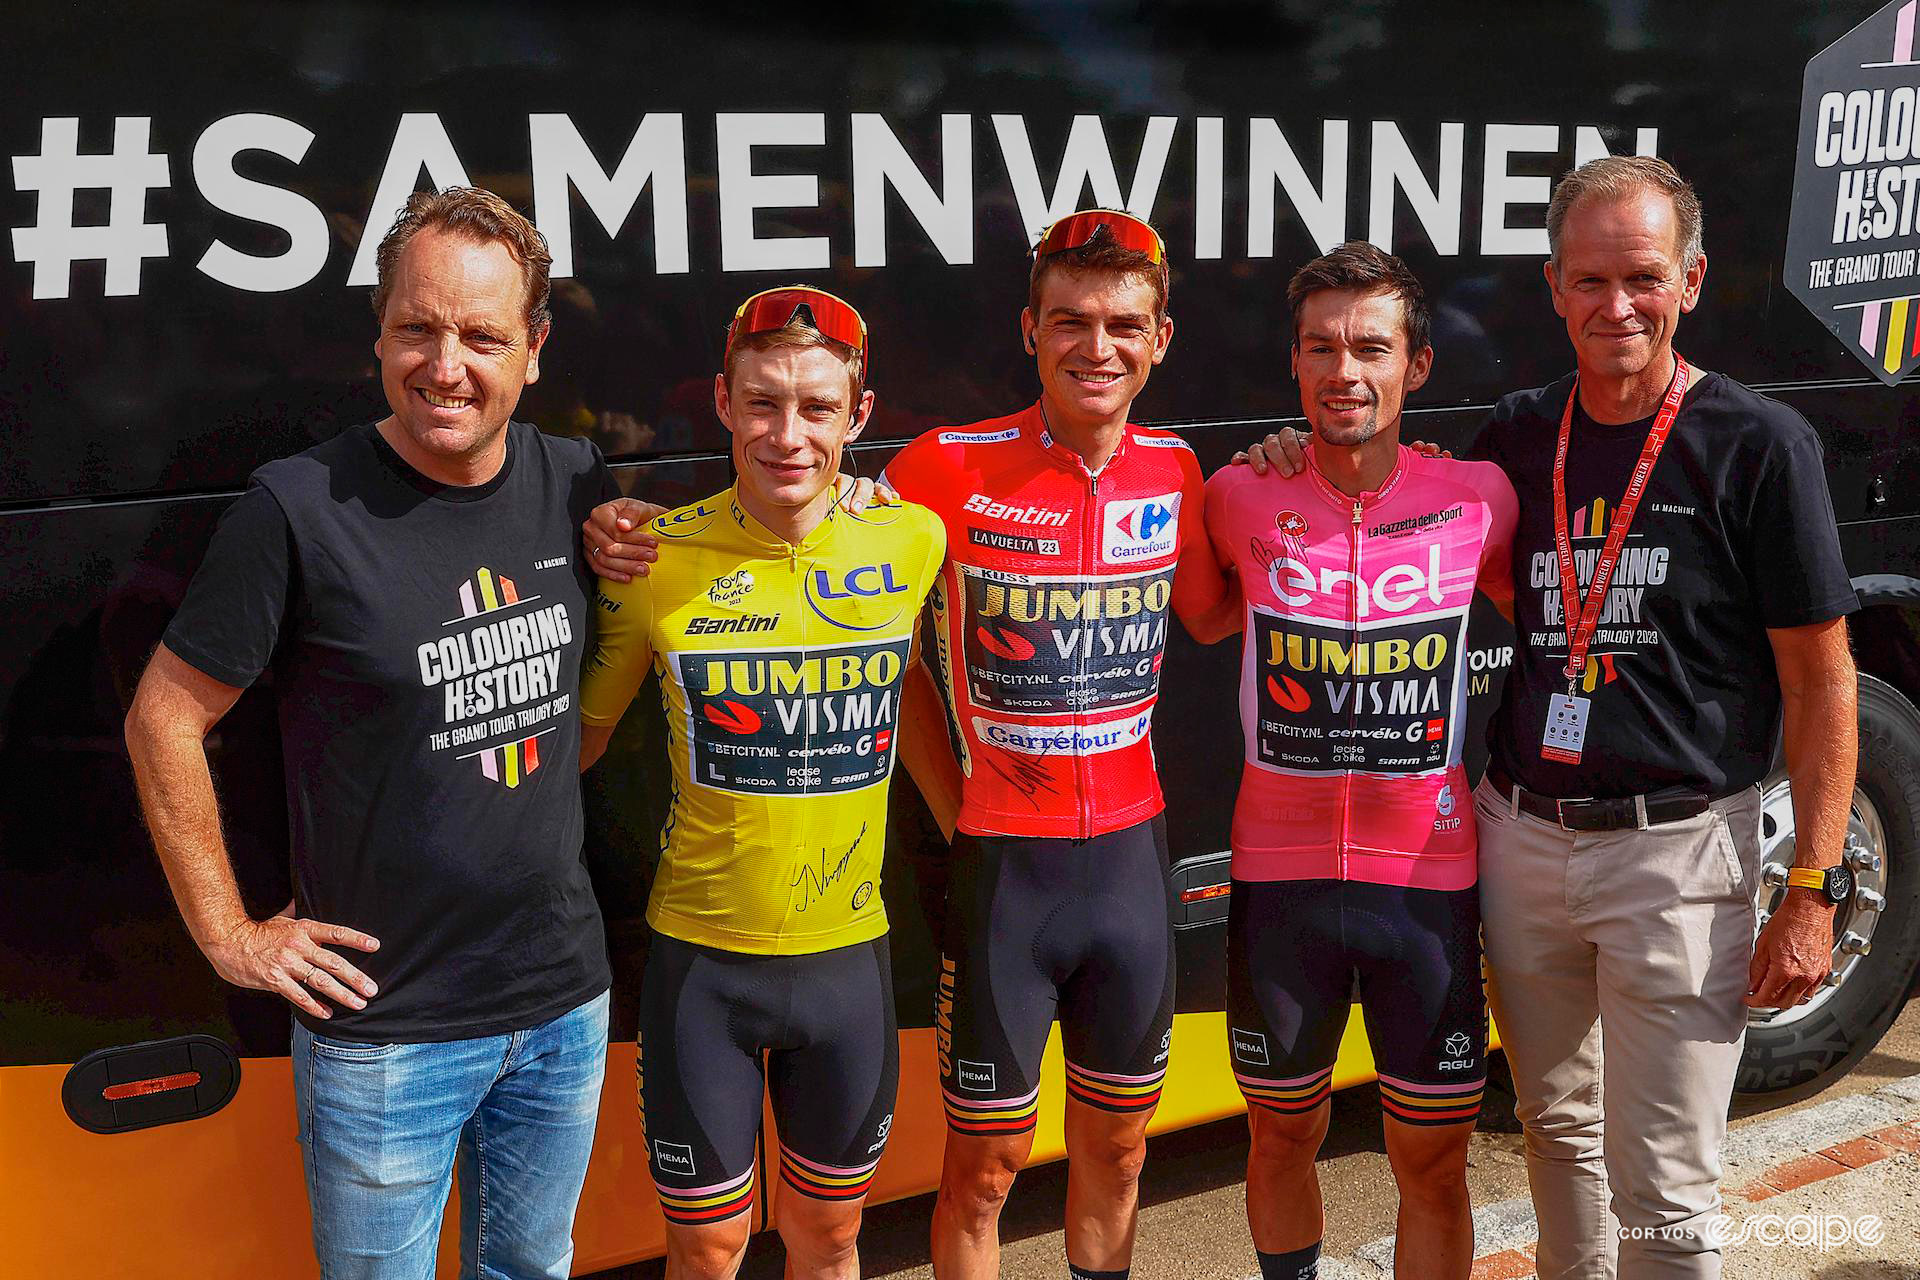 Jumbo director Marijn Zeeman and manager Richard Plugge pose for a photo at the 2023 Vuelta a España with the three winners of the Grand Tours. Between the two staff are Jonas Vingegaard, Sepp Kuss, and Primož Roglič.